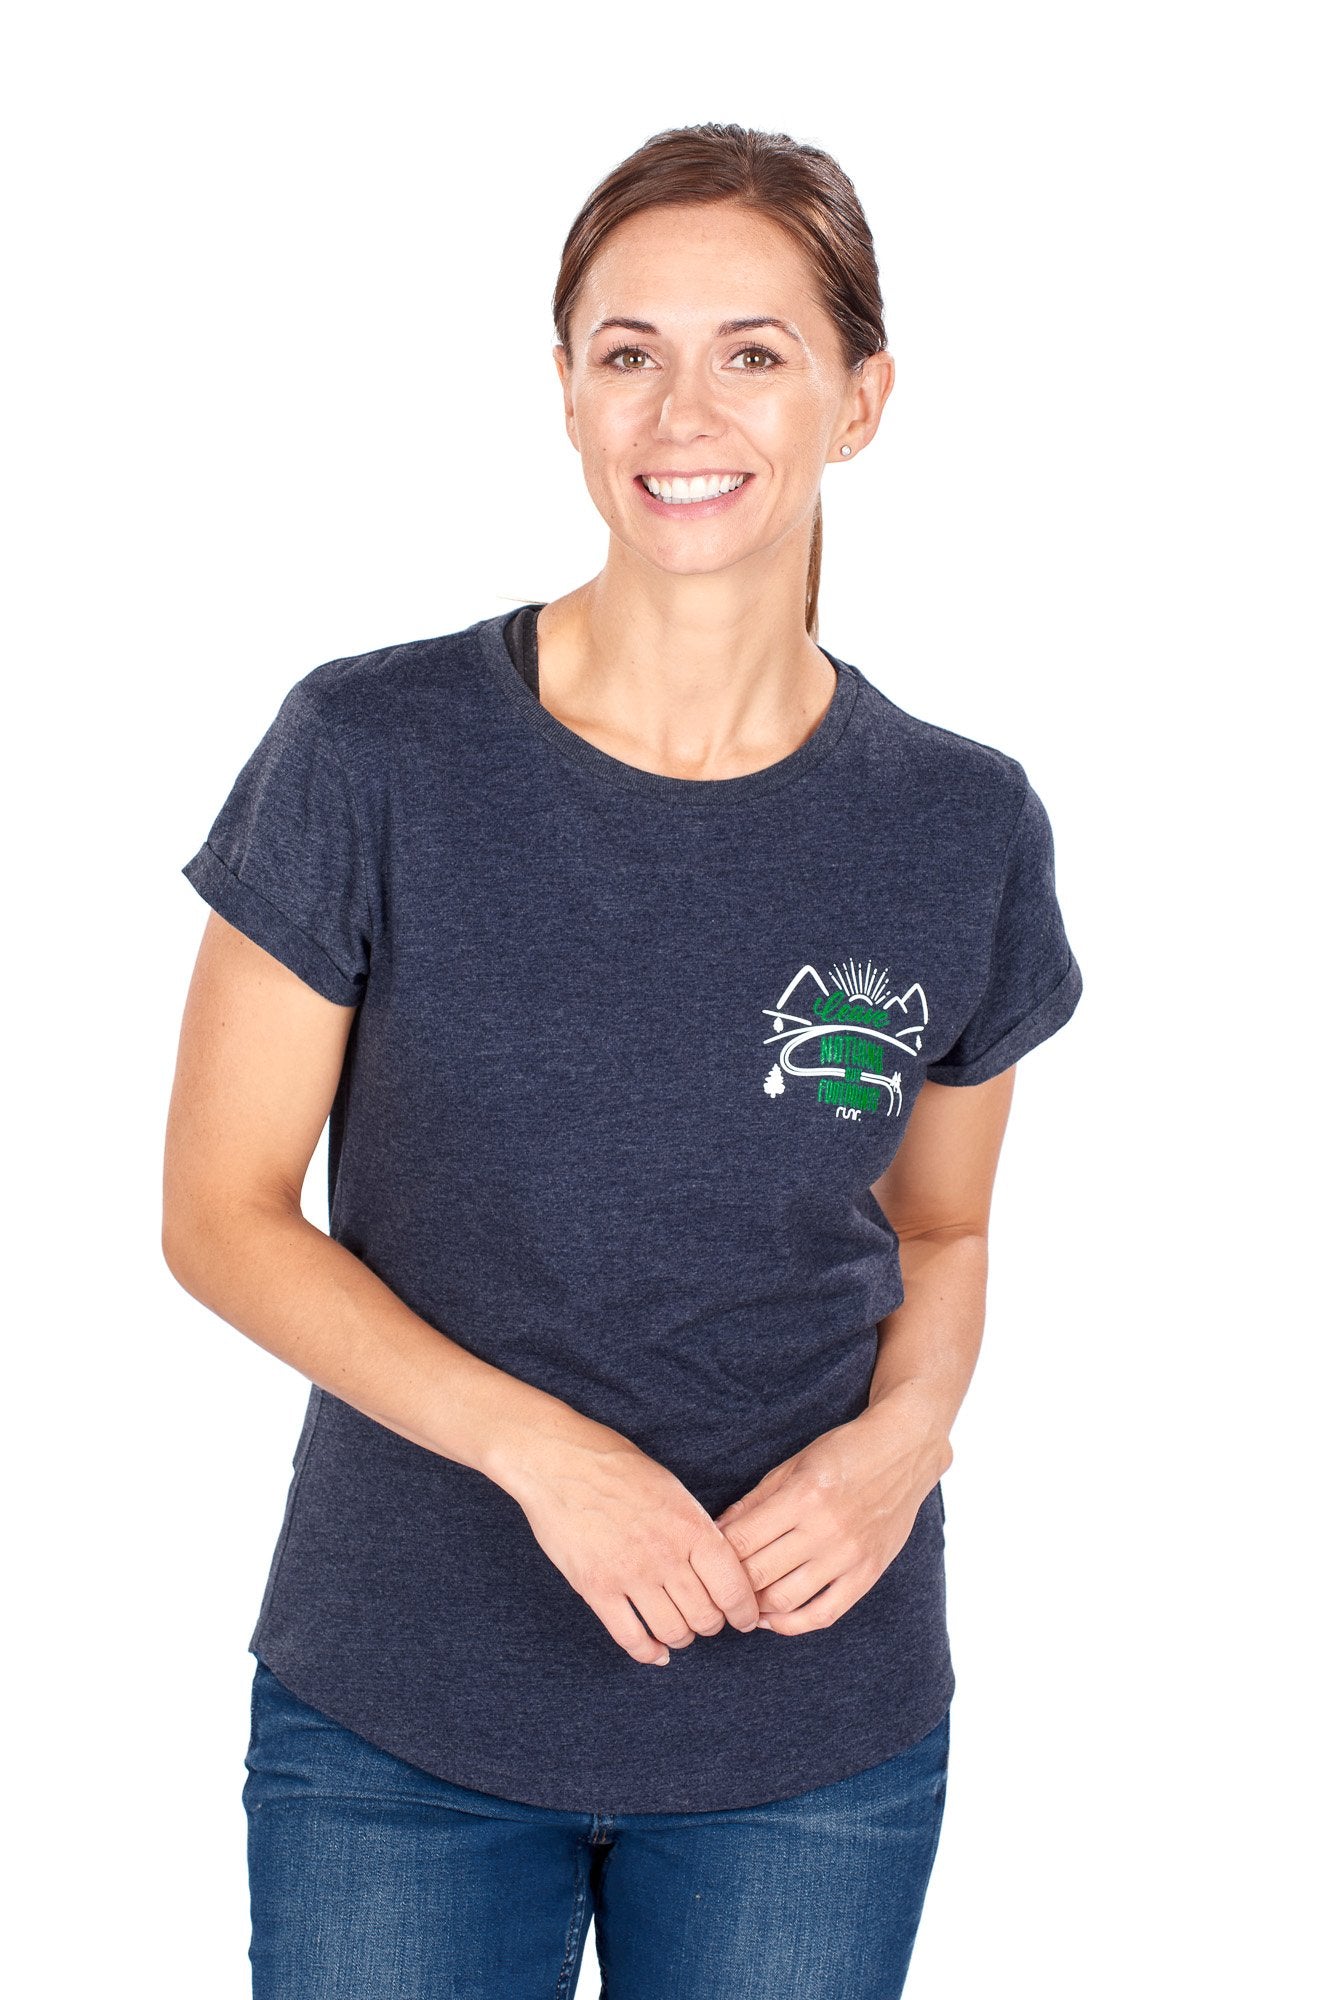 Women's 'Leave Nothing But Footprints' Runr T-Shirts - Navy